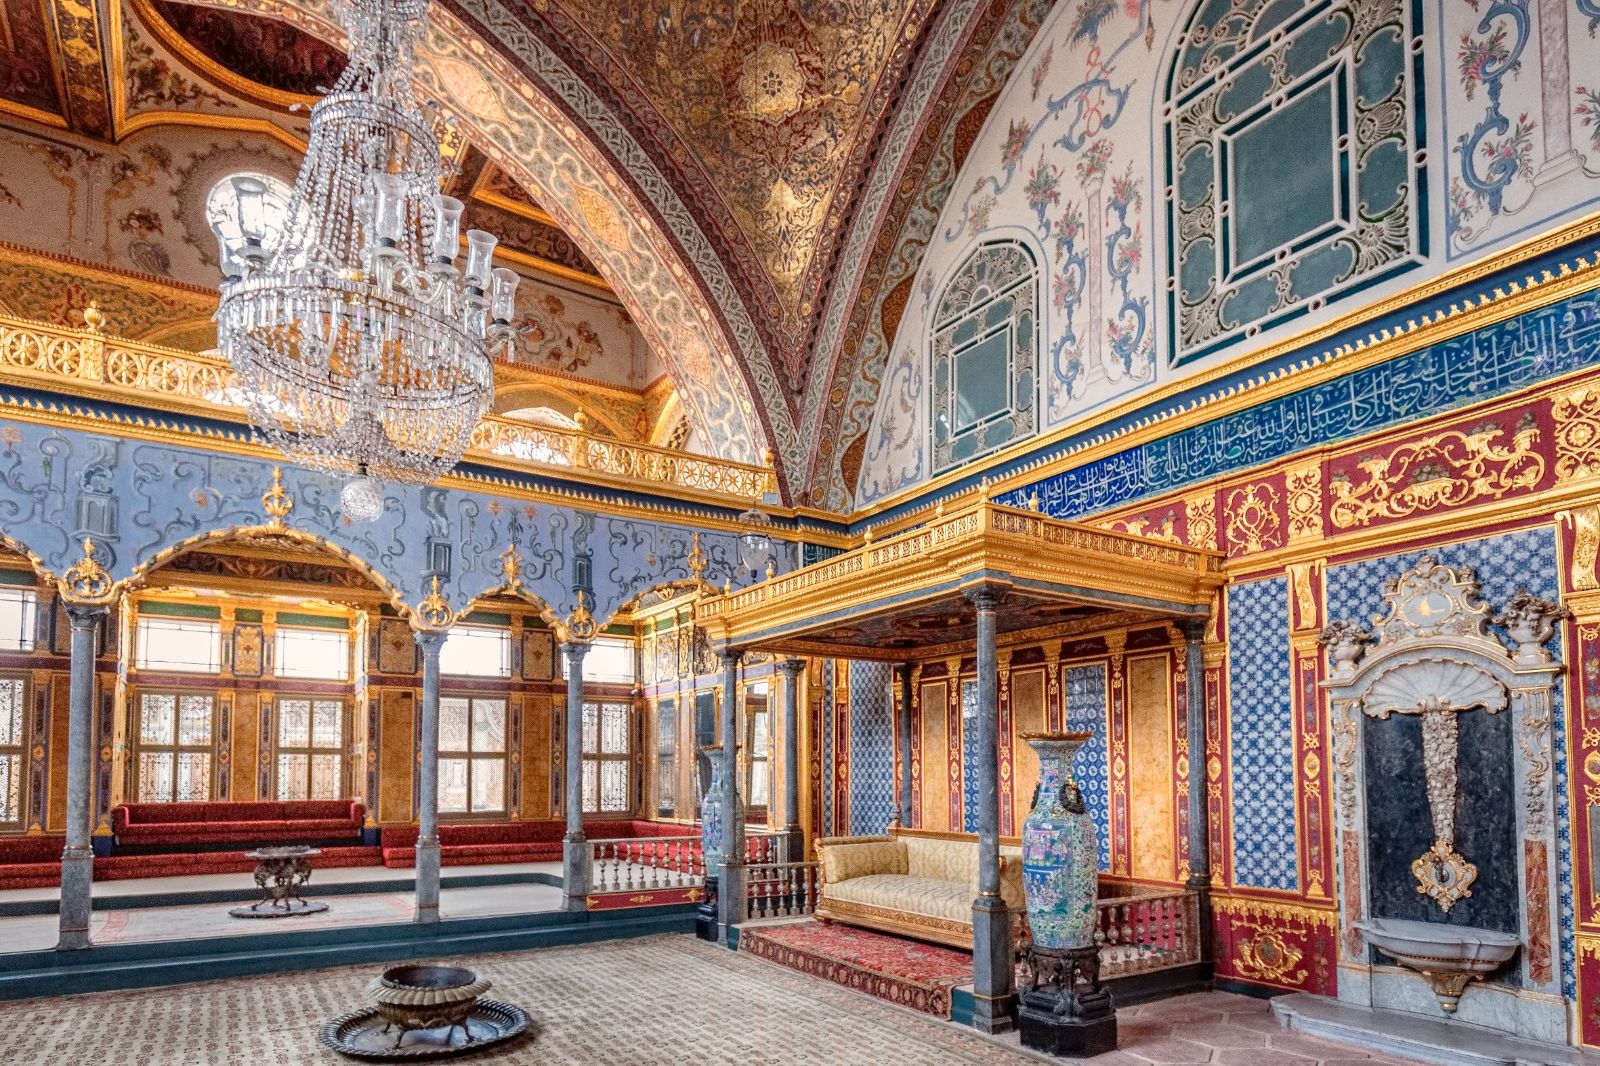 Interior view of Topkapi Palace in Istanbul, Turkey